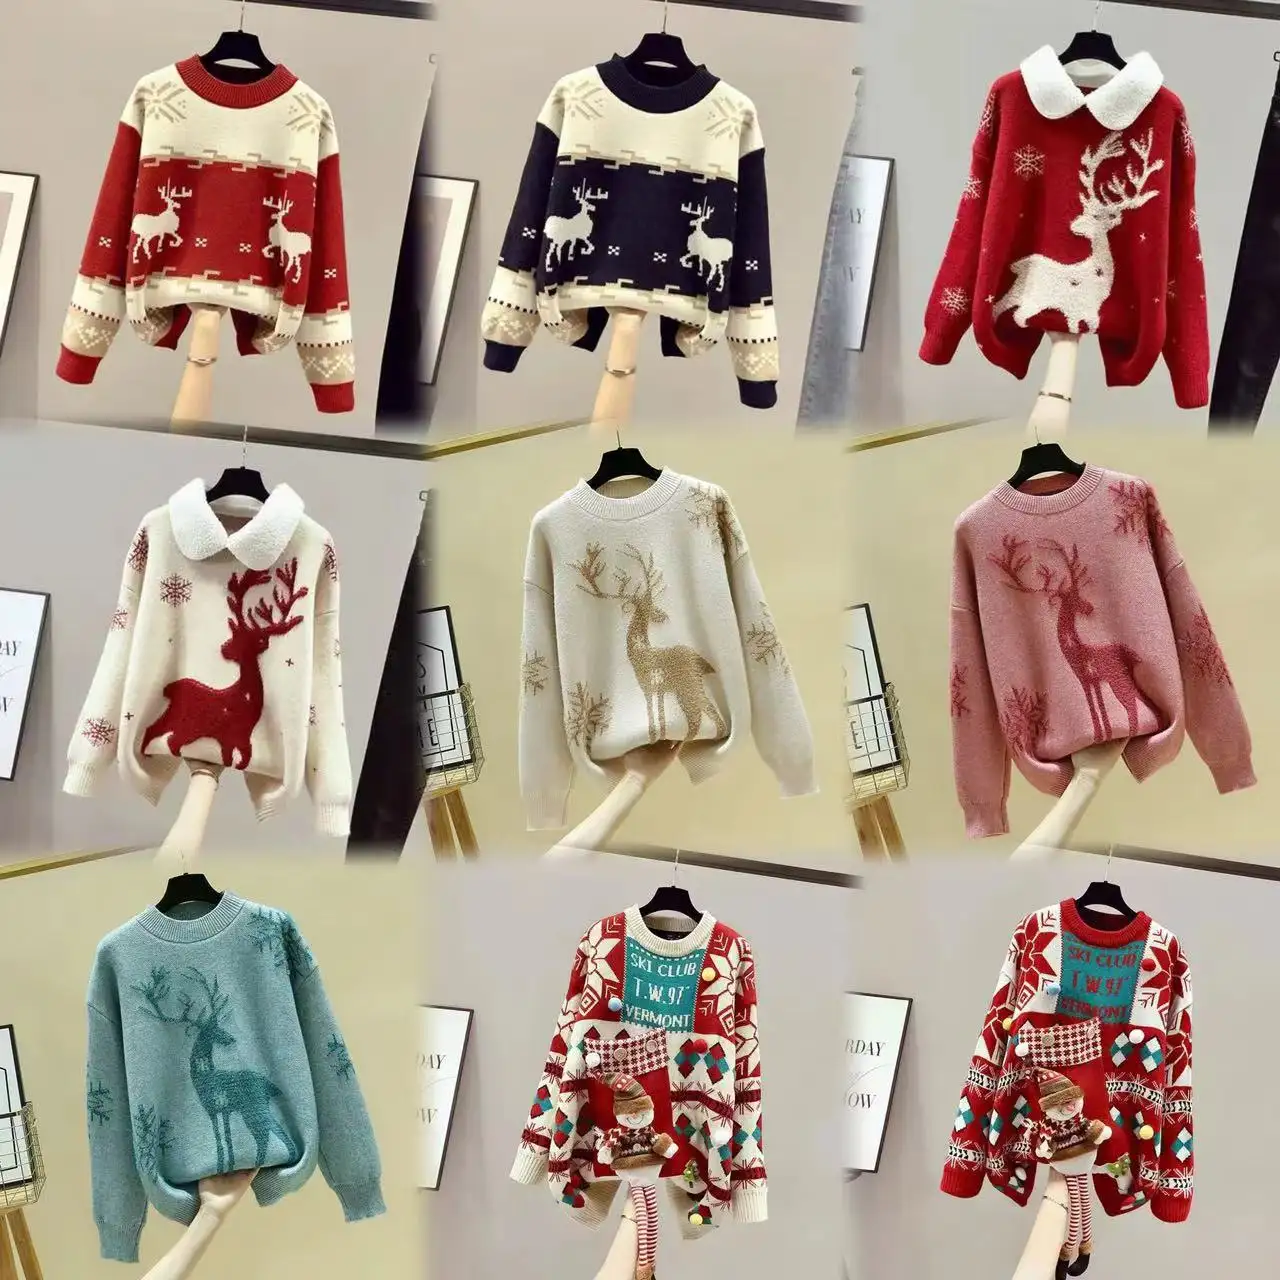 Merry Christmas Sweater for Women Ruffle Long Sleeve Knit Tops Cute Novelty Christmas Holiday Pullover Sweatshirts